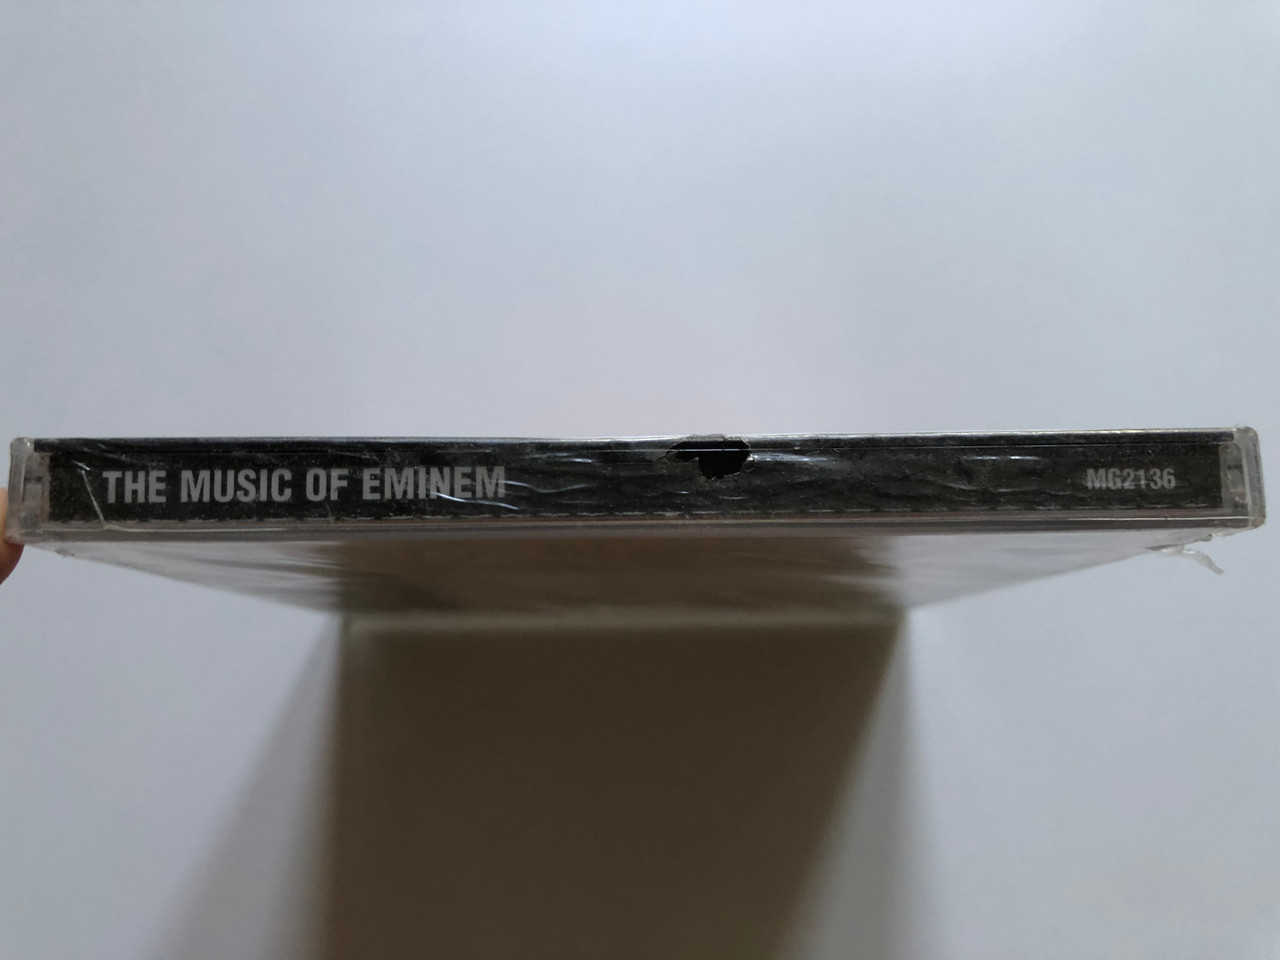 https://cdn10.bigcommerce.com/s-62bdpkt7pb/products/0/images/244299/The_Music_Of_Eminem_-_Performed_by_Buster_P._This_Album_Contains_Cover_Versions_Without_Me_Im_Shady_As_The_World_Turns_Drug_Ballad_My_Name_Is_Millennium_Gold_Audio_CD_2002_MG2136_3__94420.1659364005.1280.1280.JPG?c=2&_gl=1*jt60ap*_ga*MjA2NTIxMjE2MC4xNTkwNTEyNTMy*_ga_WS2VZYPC6G*MTY1OTM2MTk0MC41MDcuMS4xNjU5MzYzNzQyLjIx